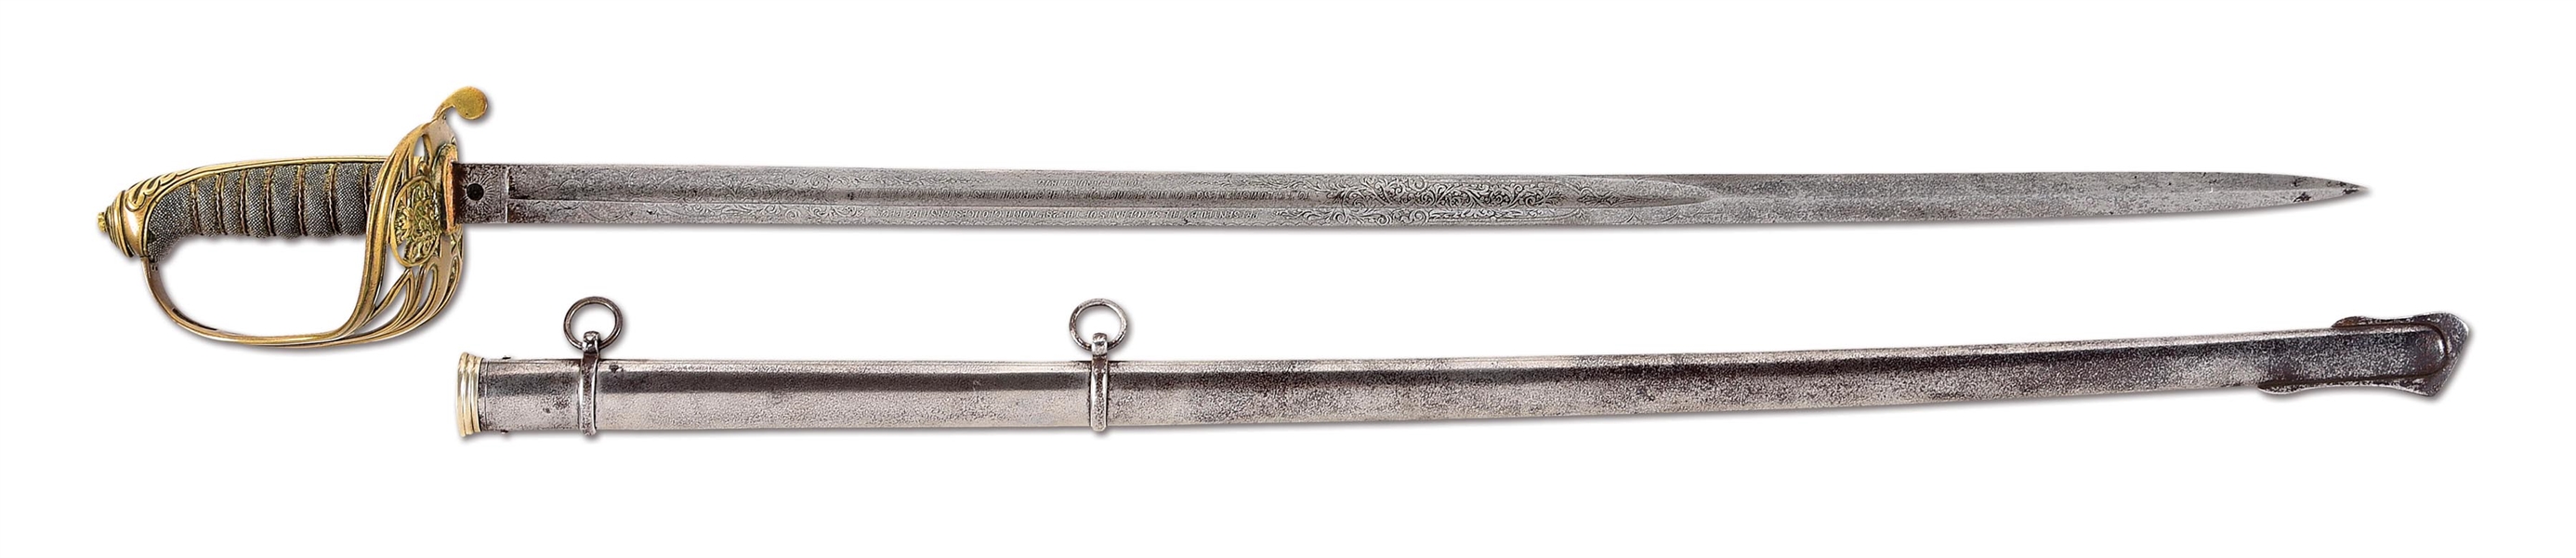 BRITISH 1854 PATTERN INFANTRY OFFICER’S SWORD PRESENTED BY SERGEANTS TO ONE OF THEIR OWN UPON HIS COMMISSION.